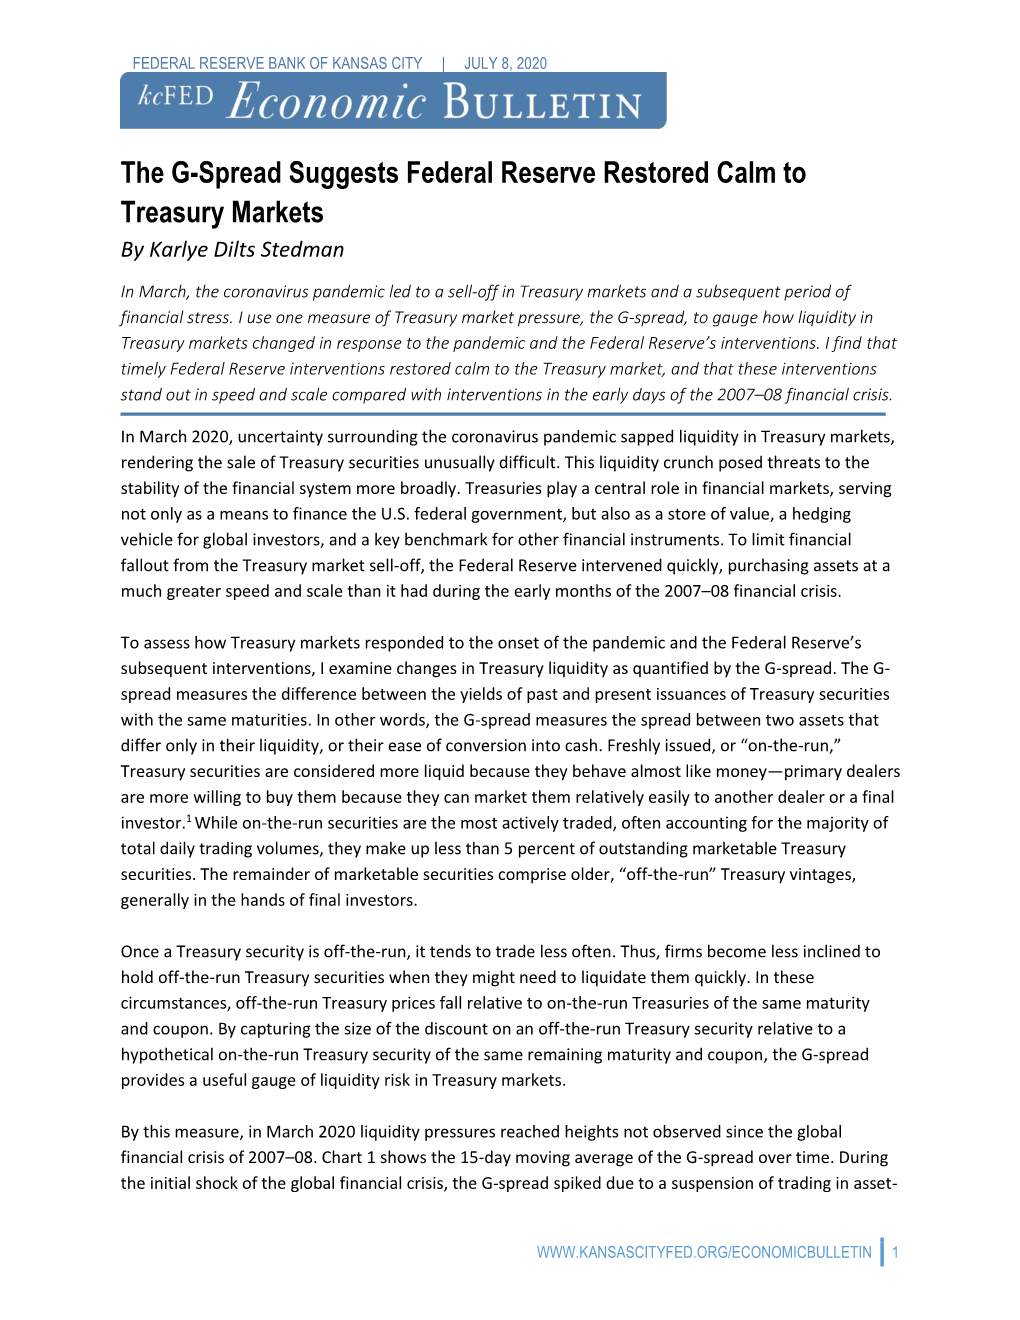 The G-Spread Suggests Federal Reserve Restored Calm to Treasury Markets by Karlye Dilts Stedman